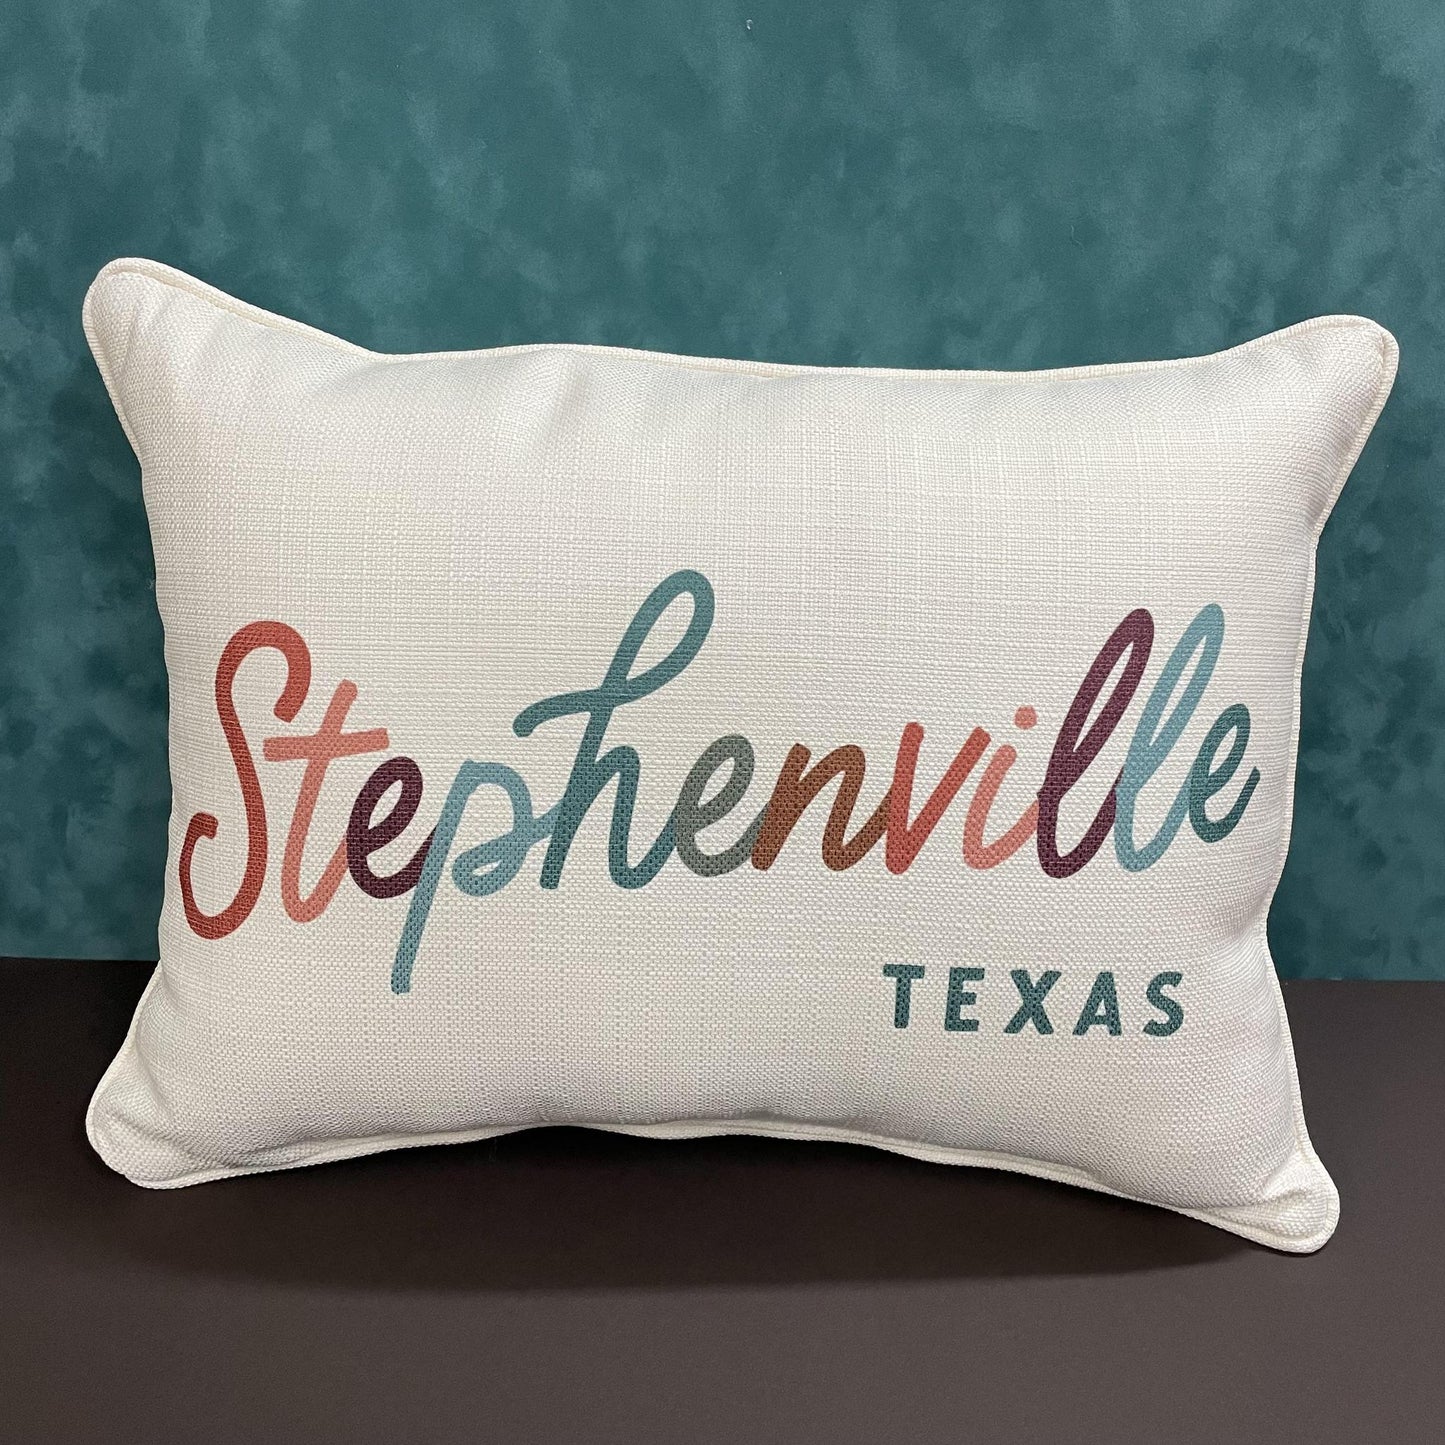 Stephenville Texas Colorful Pillow- Little Birdie